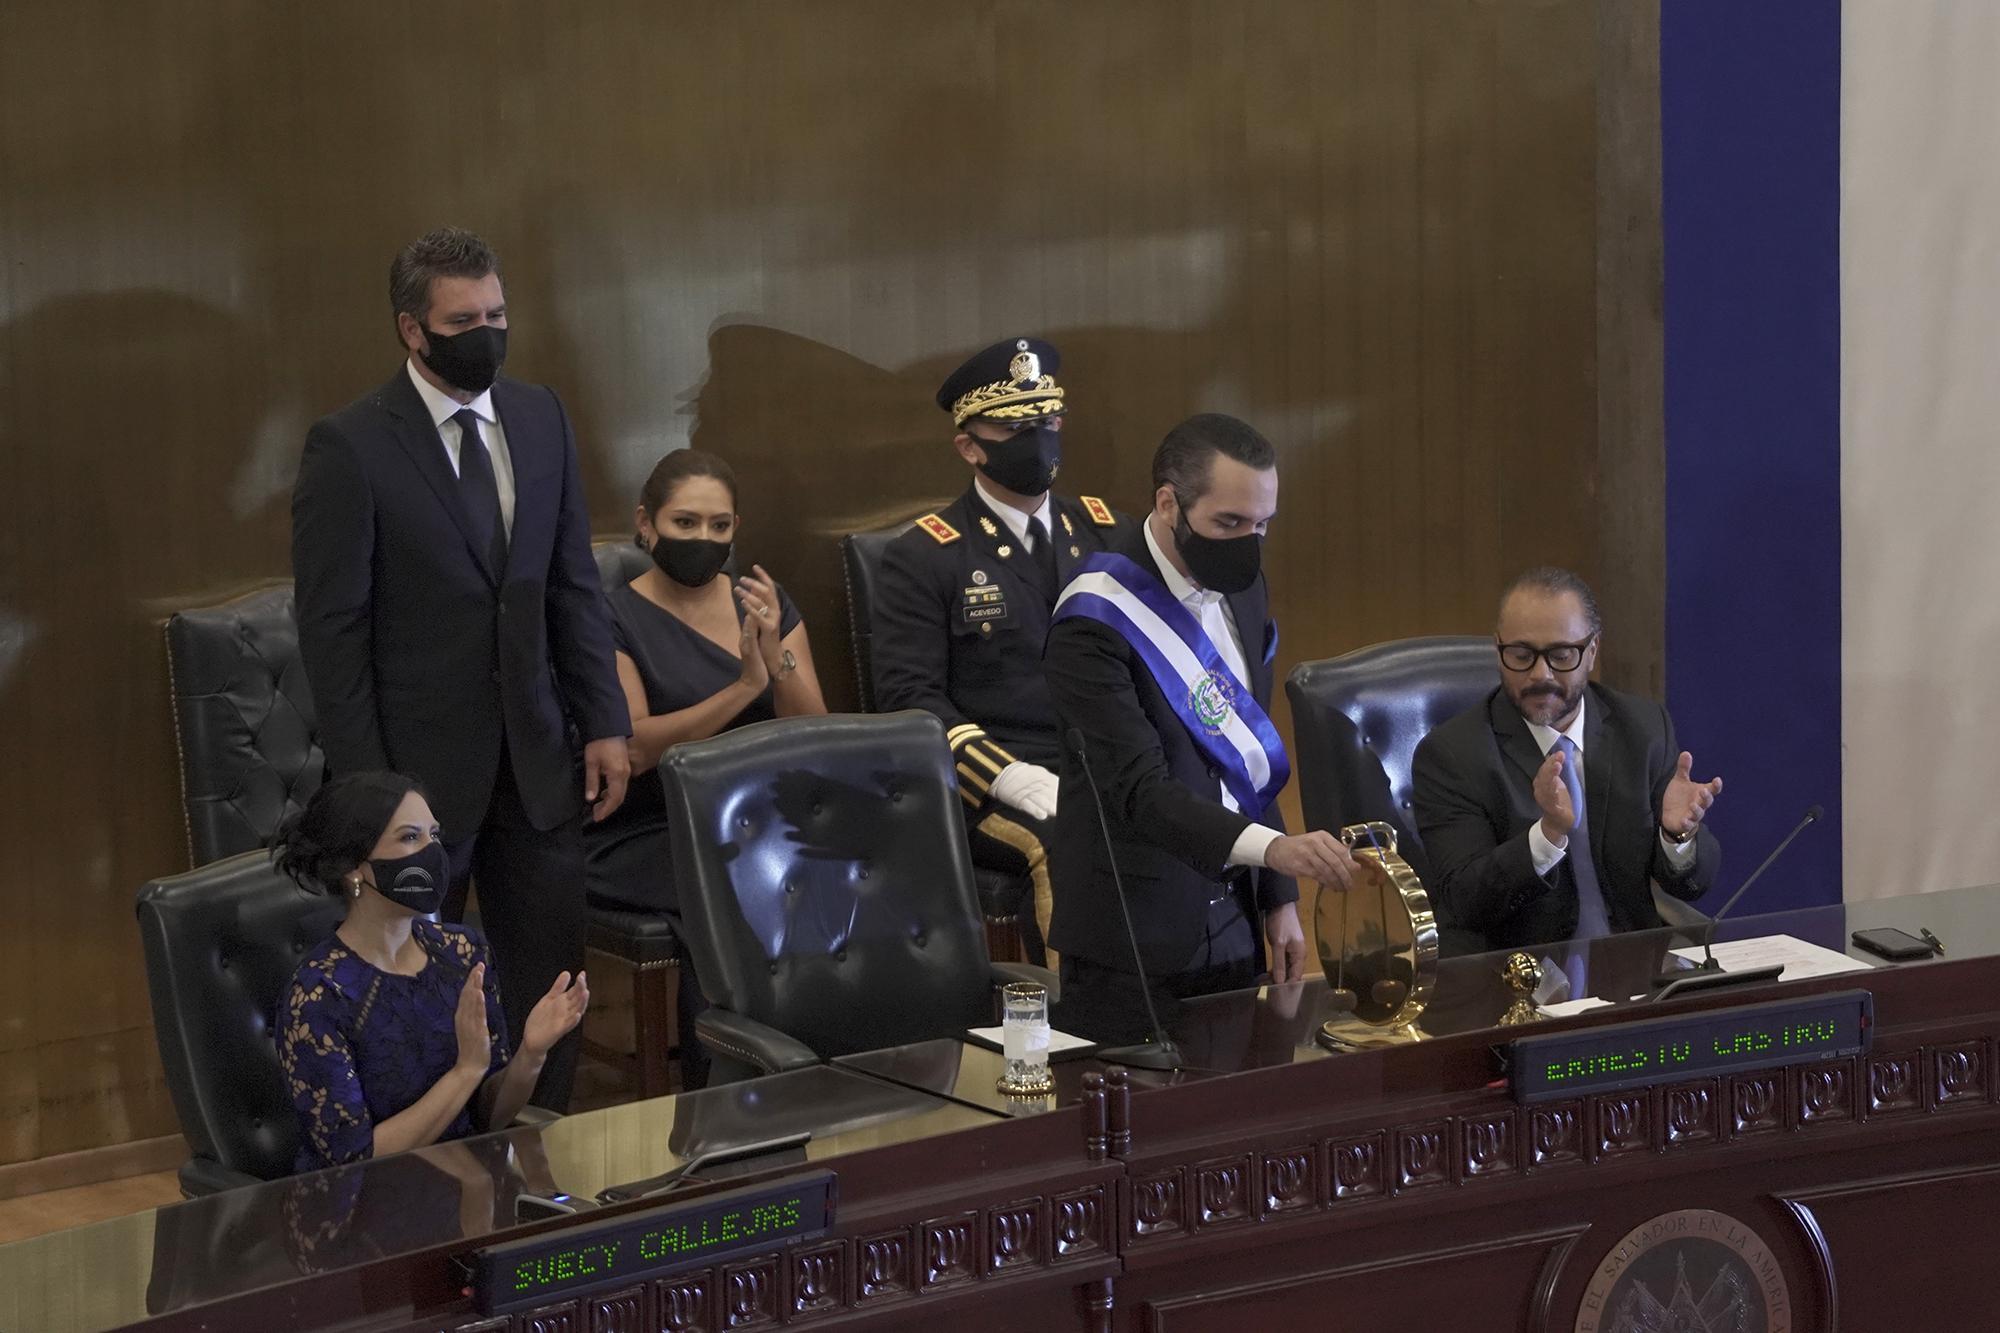 President Nayib Bukele, at the request of the president of the Legislative Assembly, rings the gong to begin an “extraordinary plenary session on accountability” in June 2021, during his second year in office. Photo by Víctor Peña / El Faro.